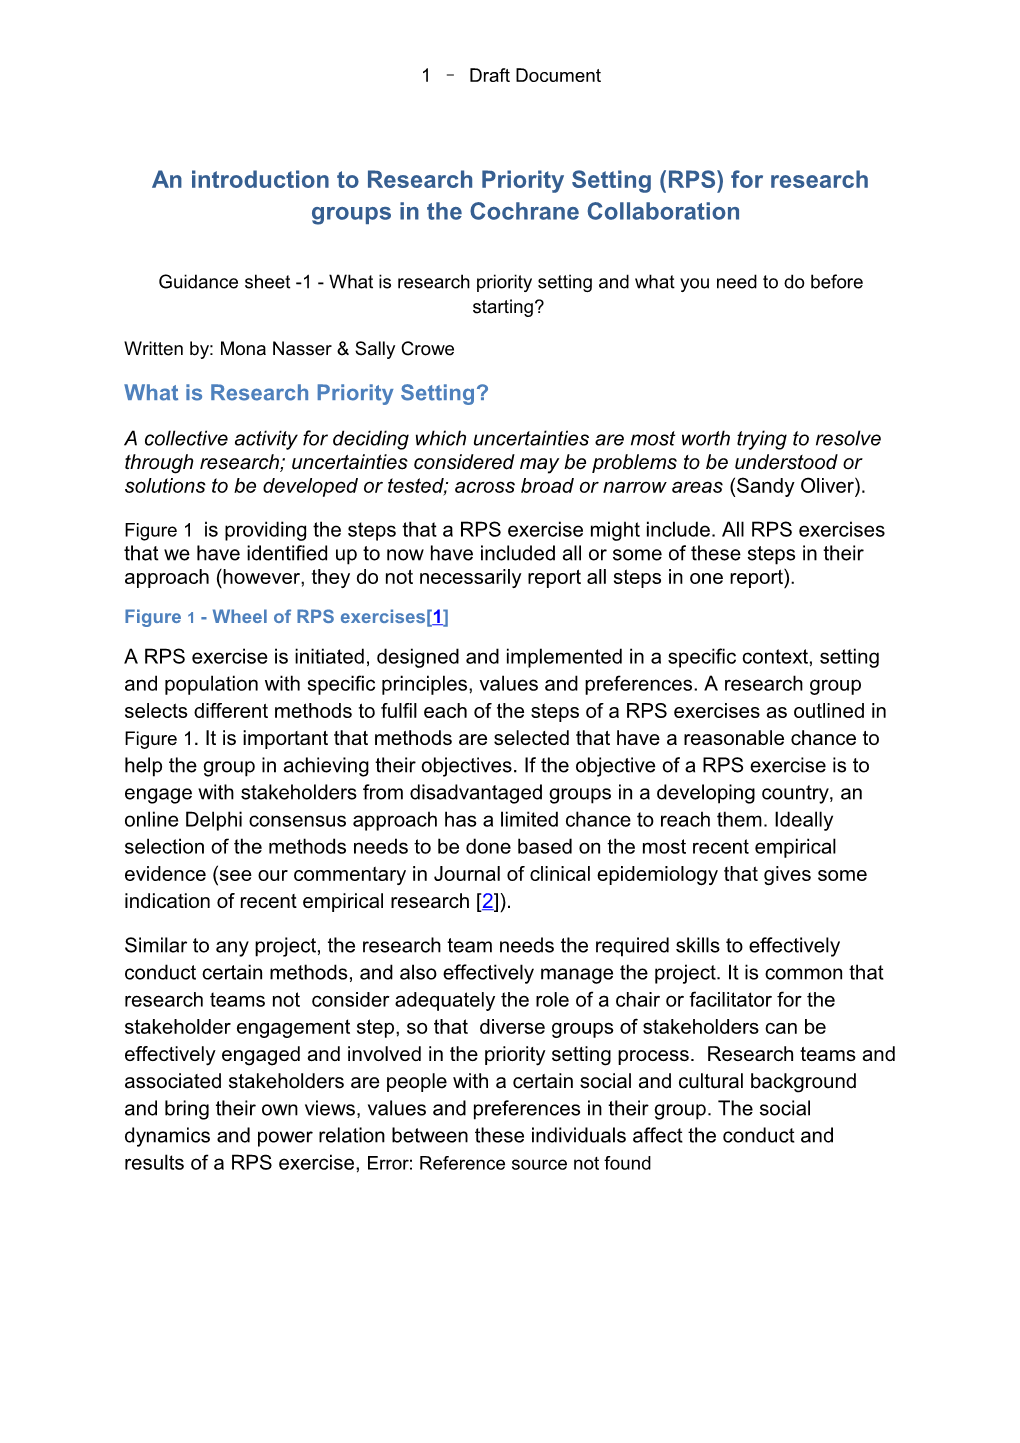 An Introduction to Research Priority Setting (RPS) for Research Groups in the Cochrane